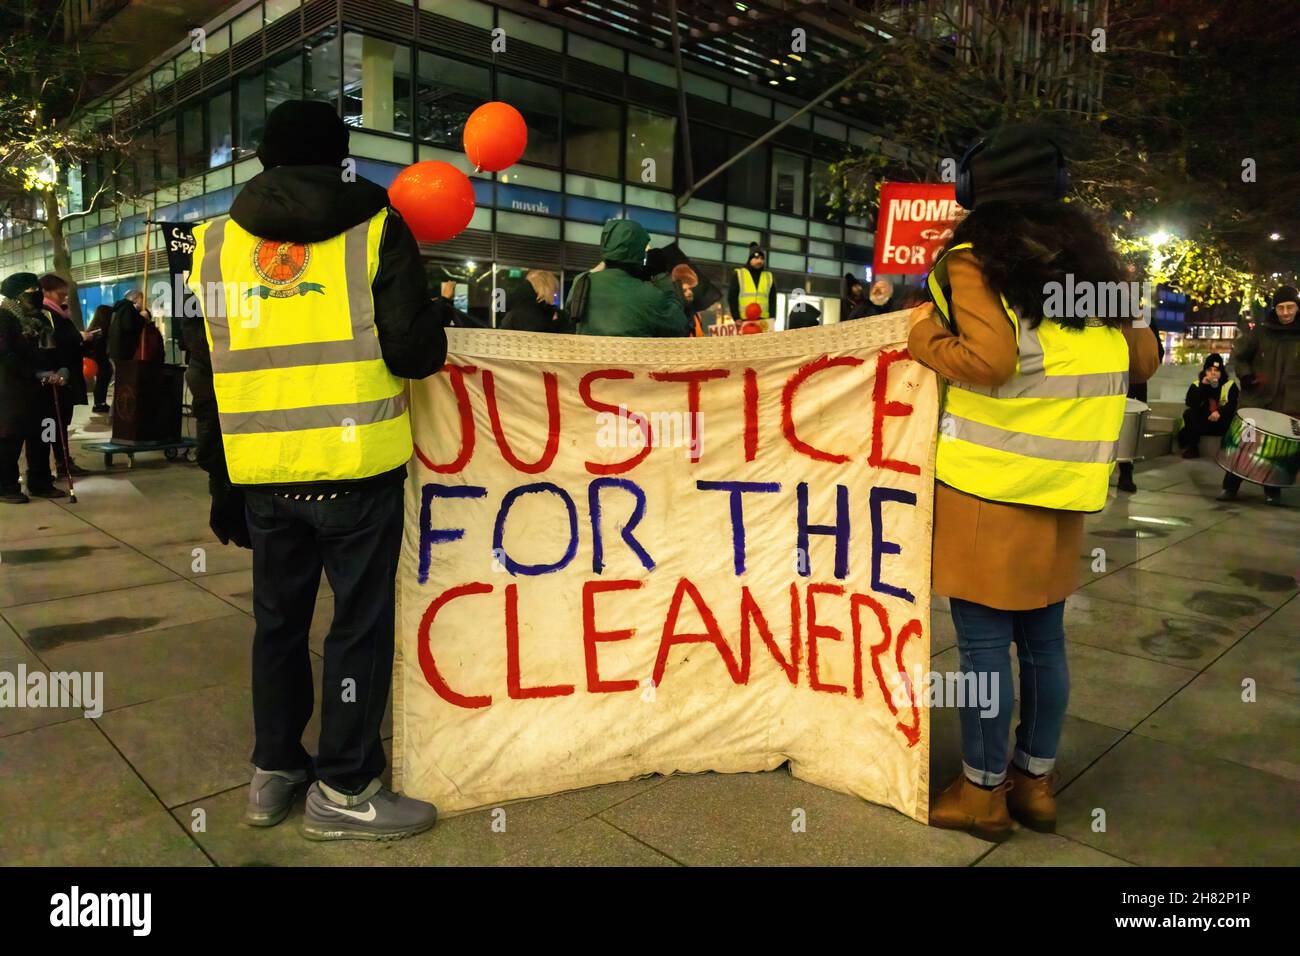 London, UK. 26th Nov, 2021. Protestors hold a banner that says 'Justice for the cleaners' during a protest outside Facebook headquarters at Warren Street in London.The group of protesters led by the Independent Workers Union protested at the Facebook London office after it increased workload without a salary increase. Jones Lang LaSalle (JLL) has outsourced the cleaning obligations to Churchill Services to clean the office of Facebook. Also, they allegedly mistreated the cleaners which resulted in the protest. Credit: SOPA Images Limited/Alamy Live News Stock Photo